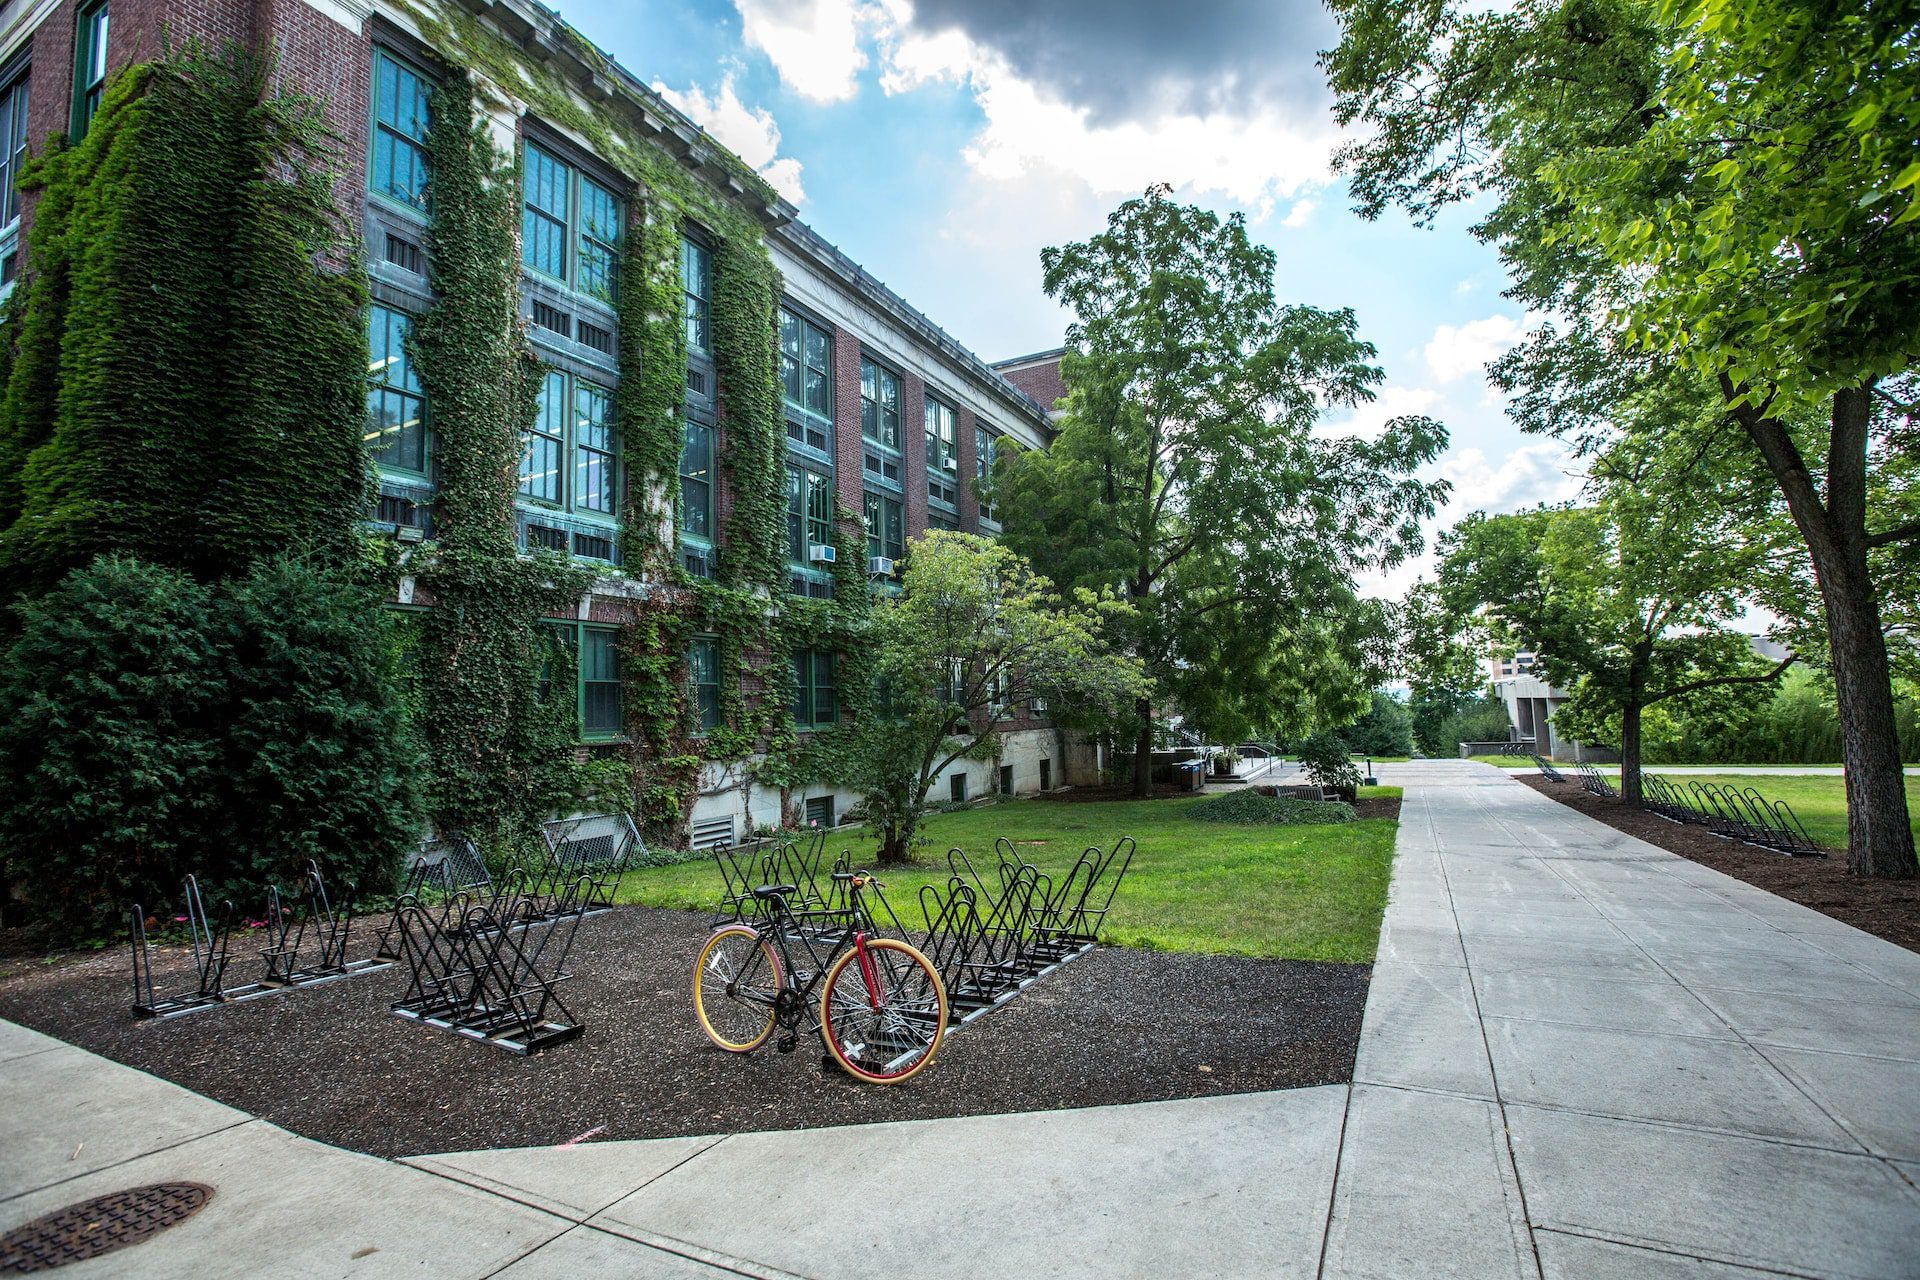 Building with bike rack in Syracuse, New York.